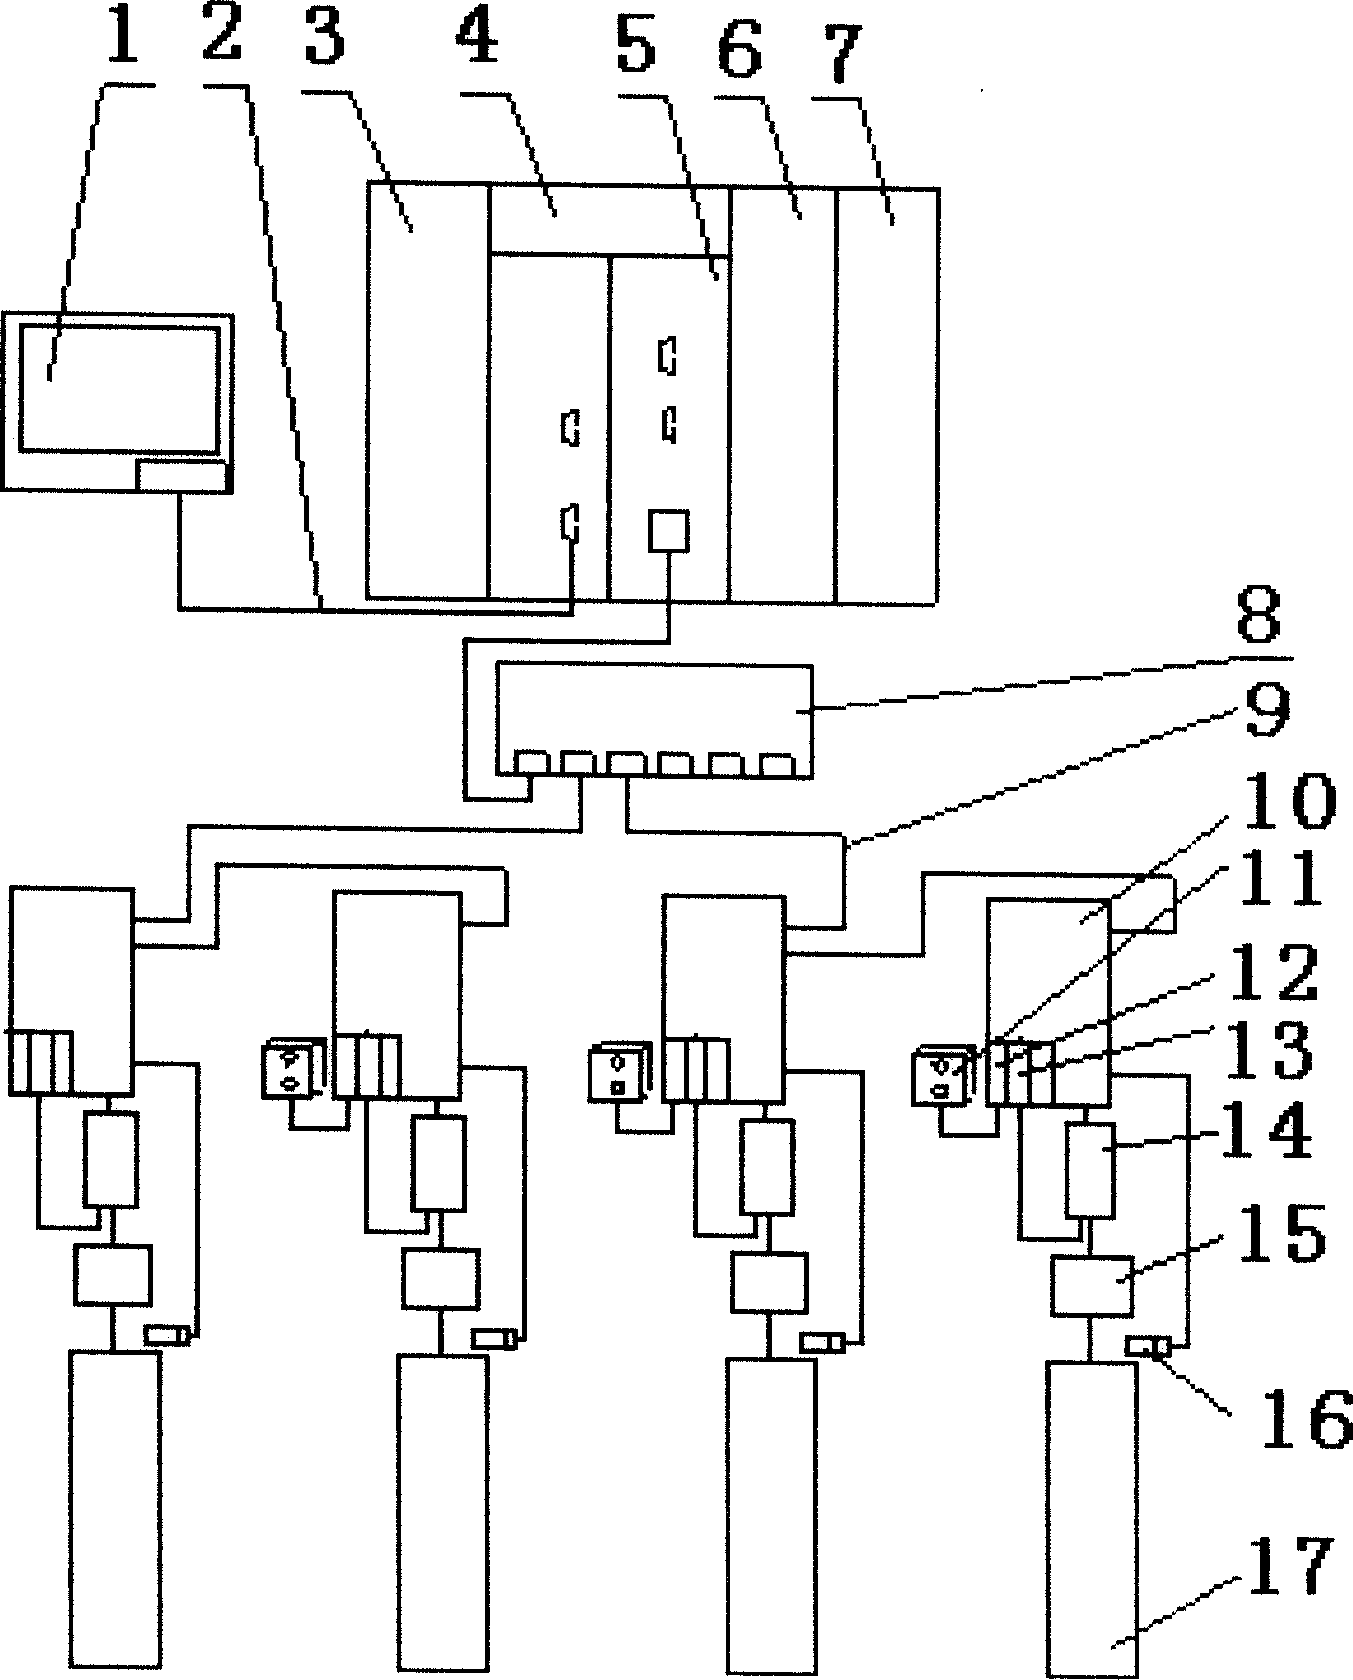 Integrated photoelectronic registration and shaftless transmission control system for intaglio printing machine in a set